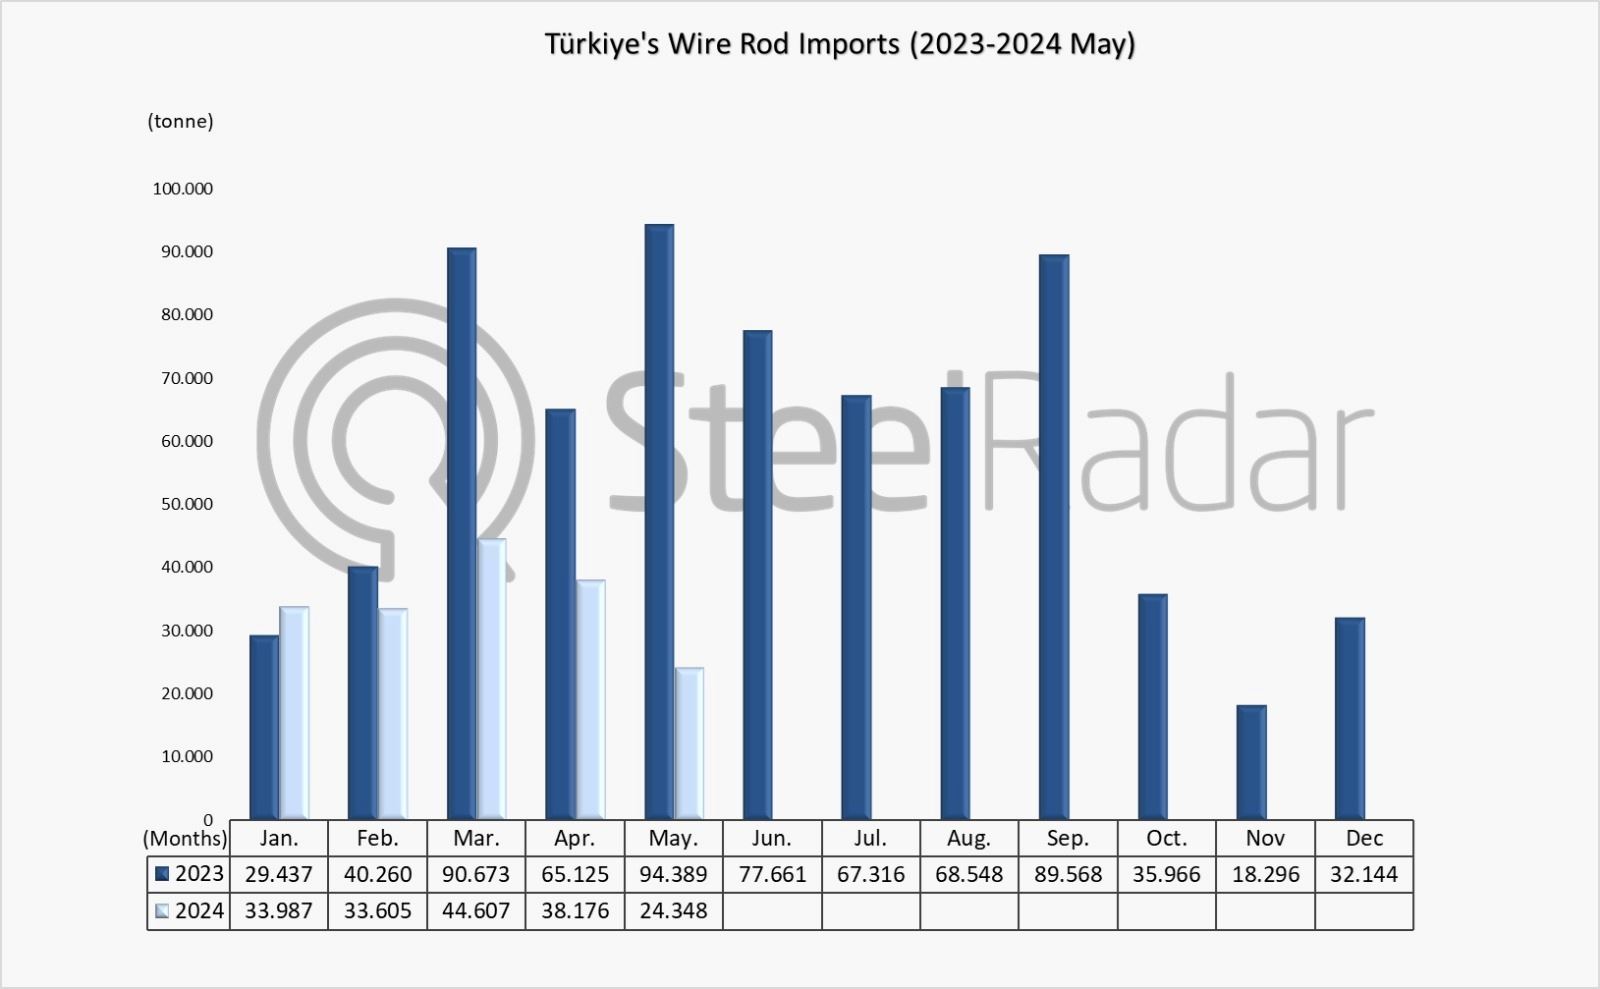 Wire rod imports of Türkiye decreased by 45.4% in January-May period